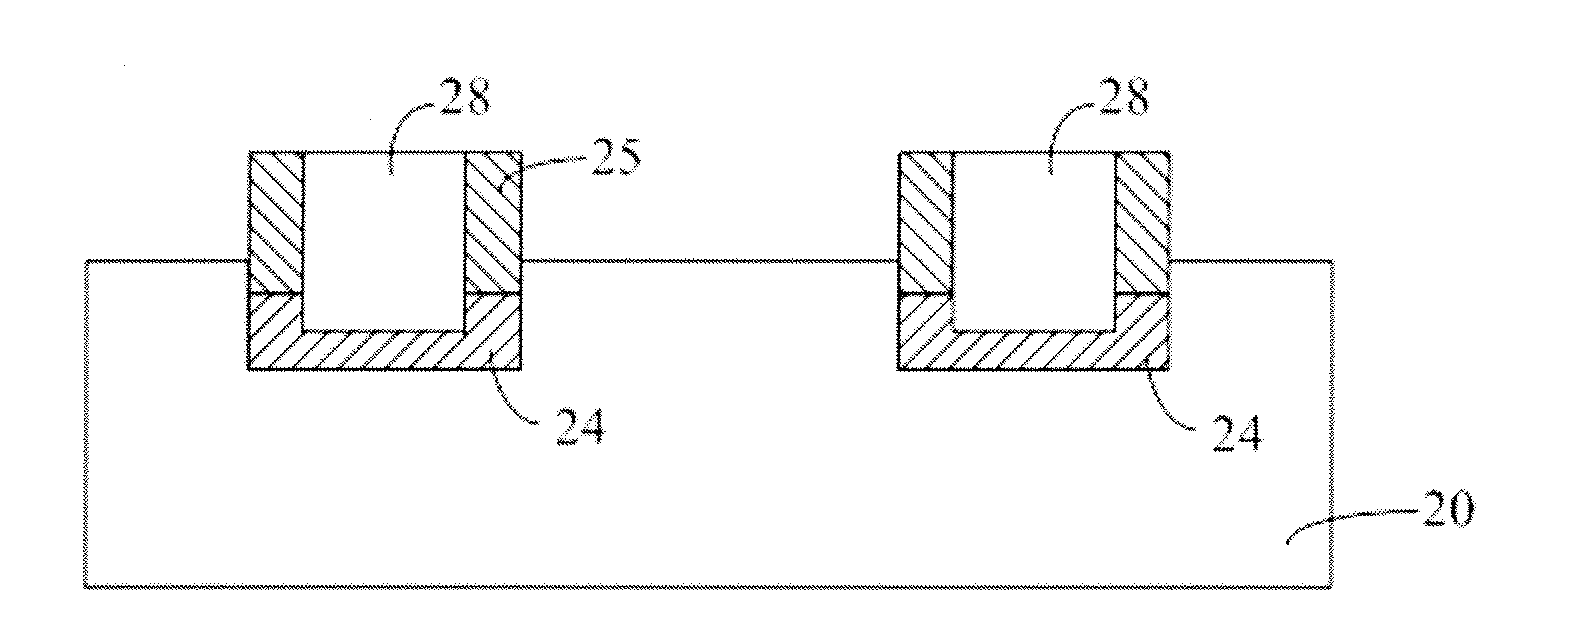 Shallow trench isolation structure and method for forming the same